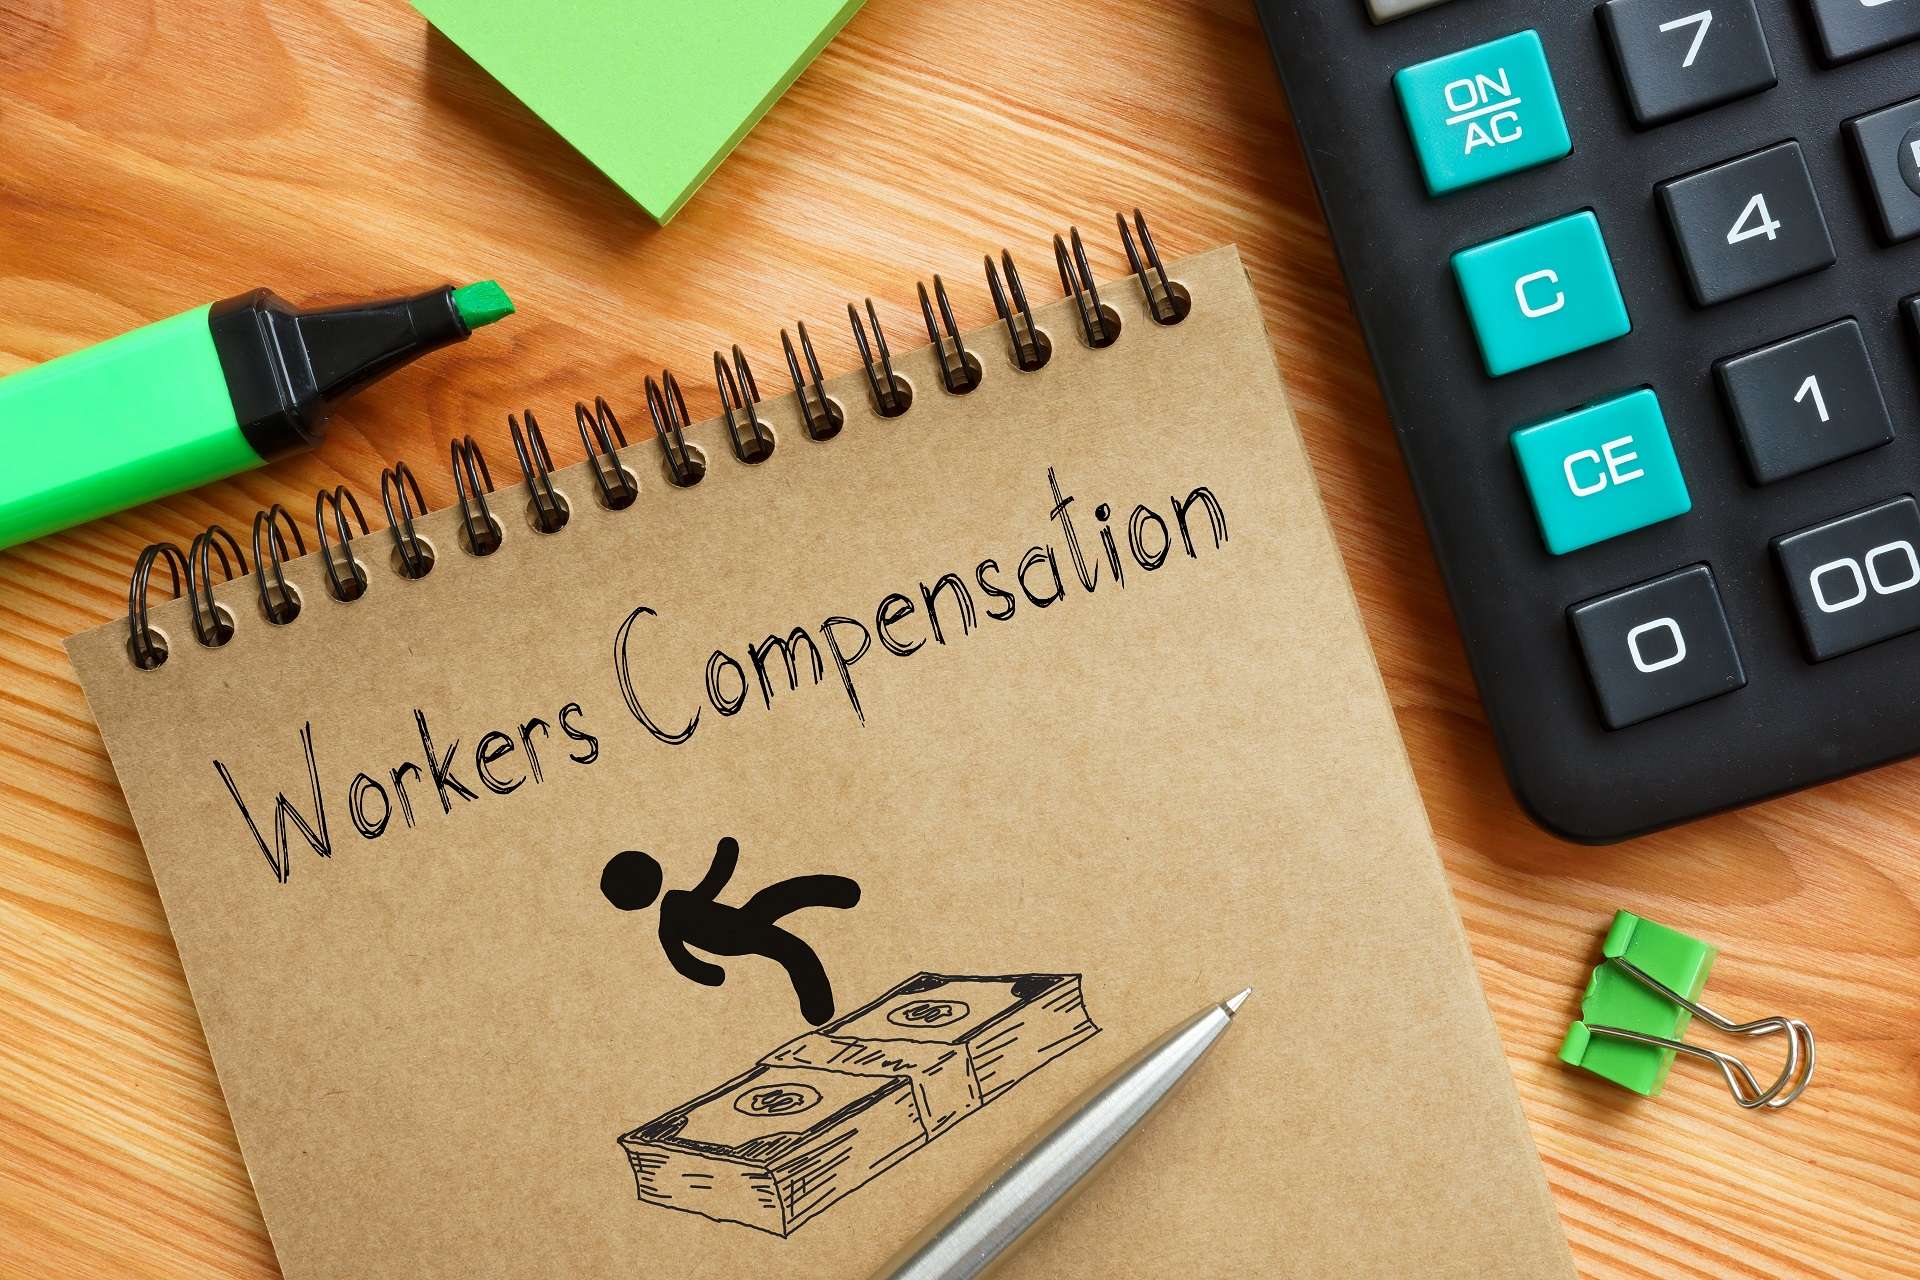 Workers’ Compensation Act